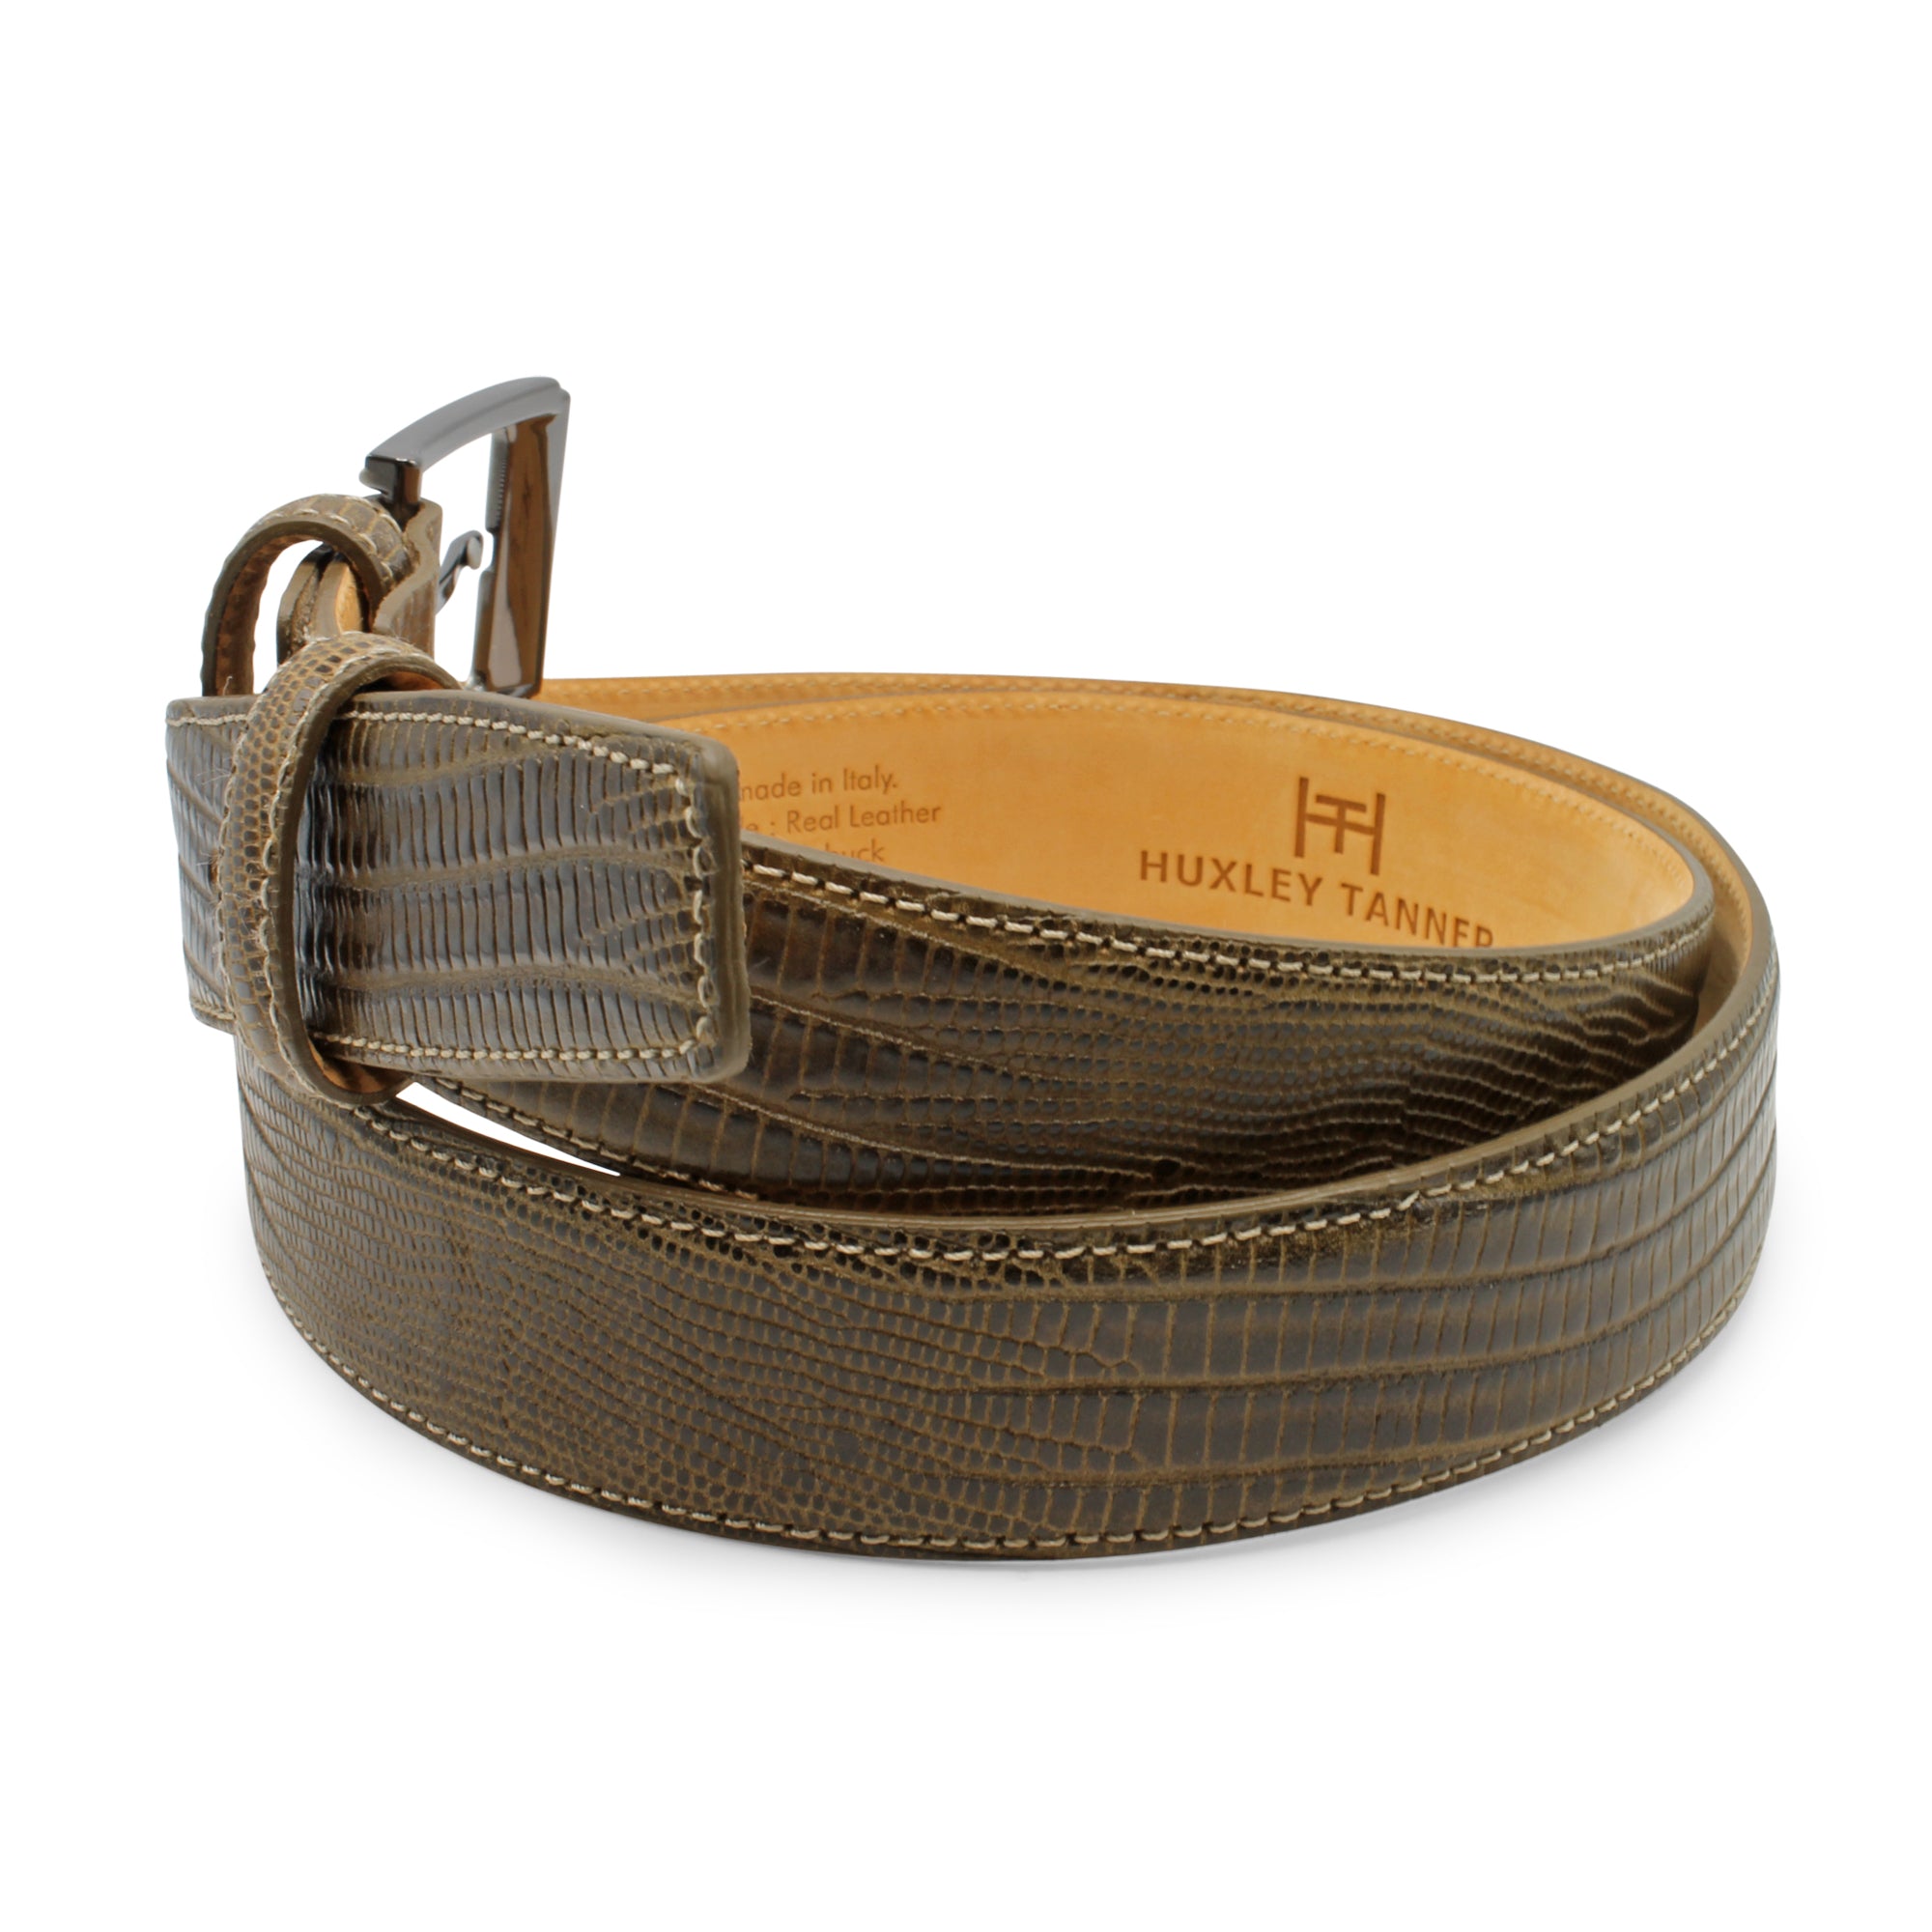 Tejus Texture Leather Belt 35mm